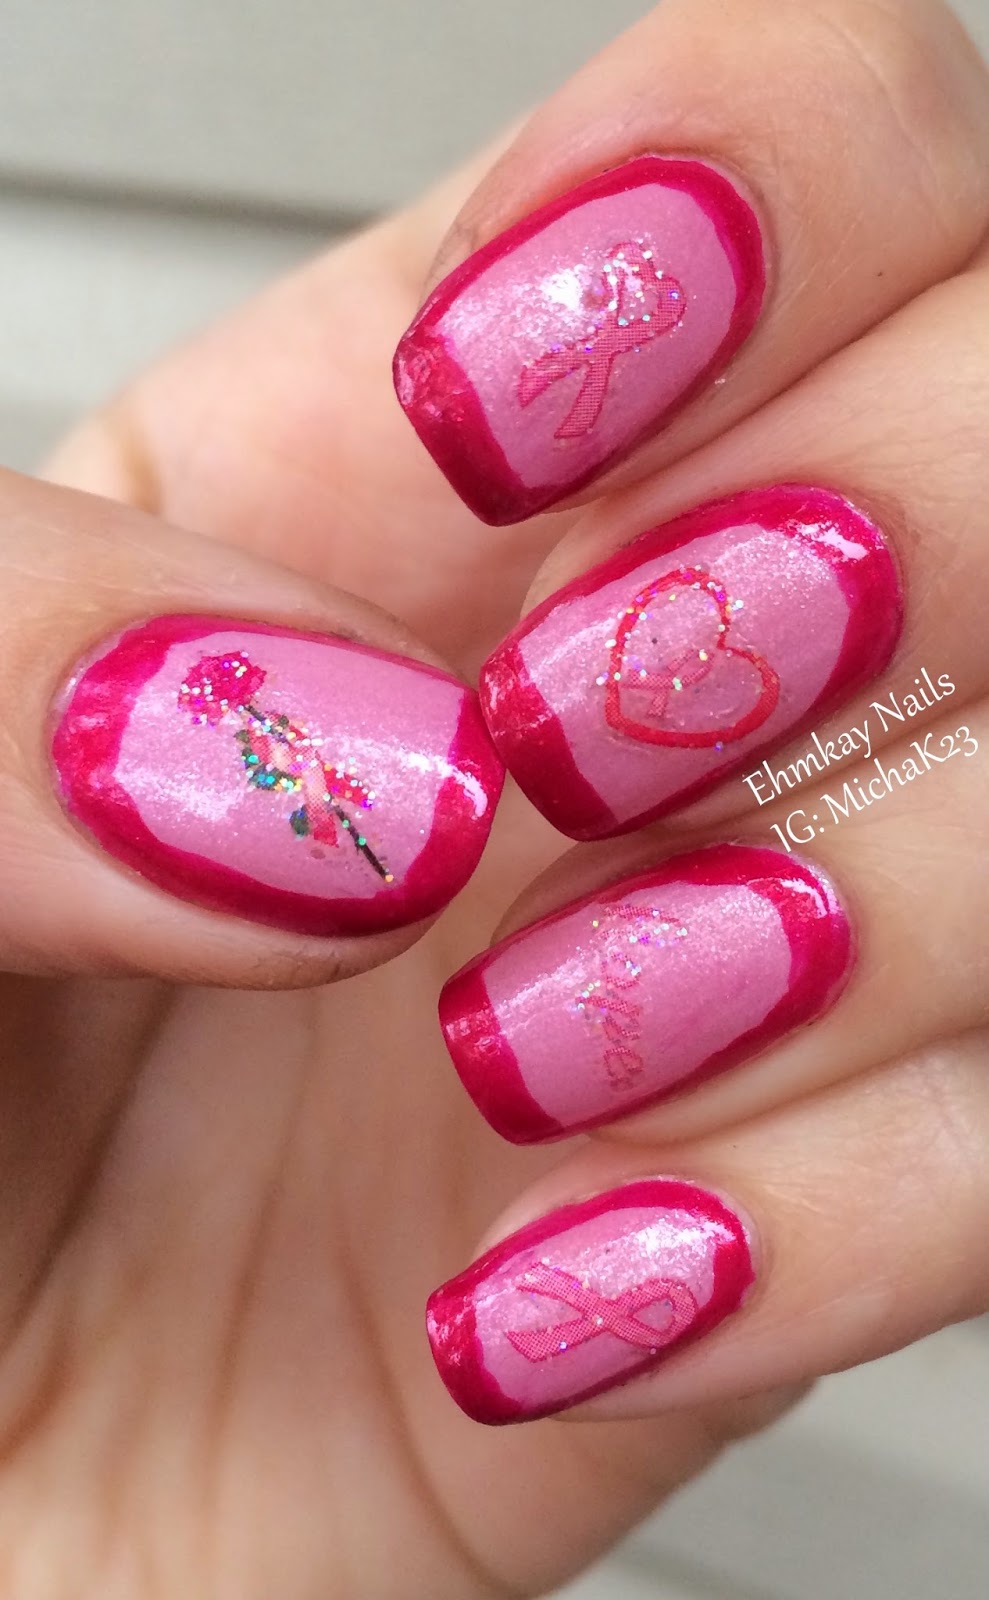 ehmkay nails: Breast Cancer Awareness Nail Art with Joby Decals